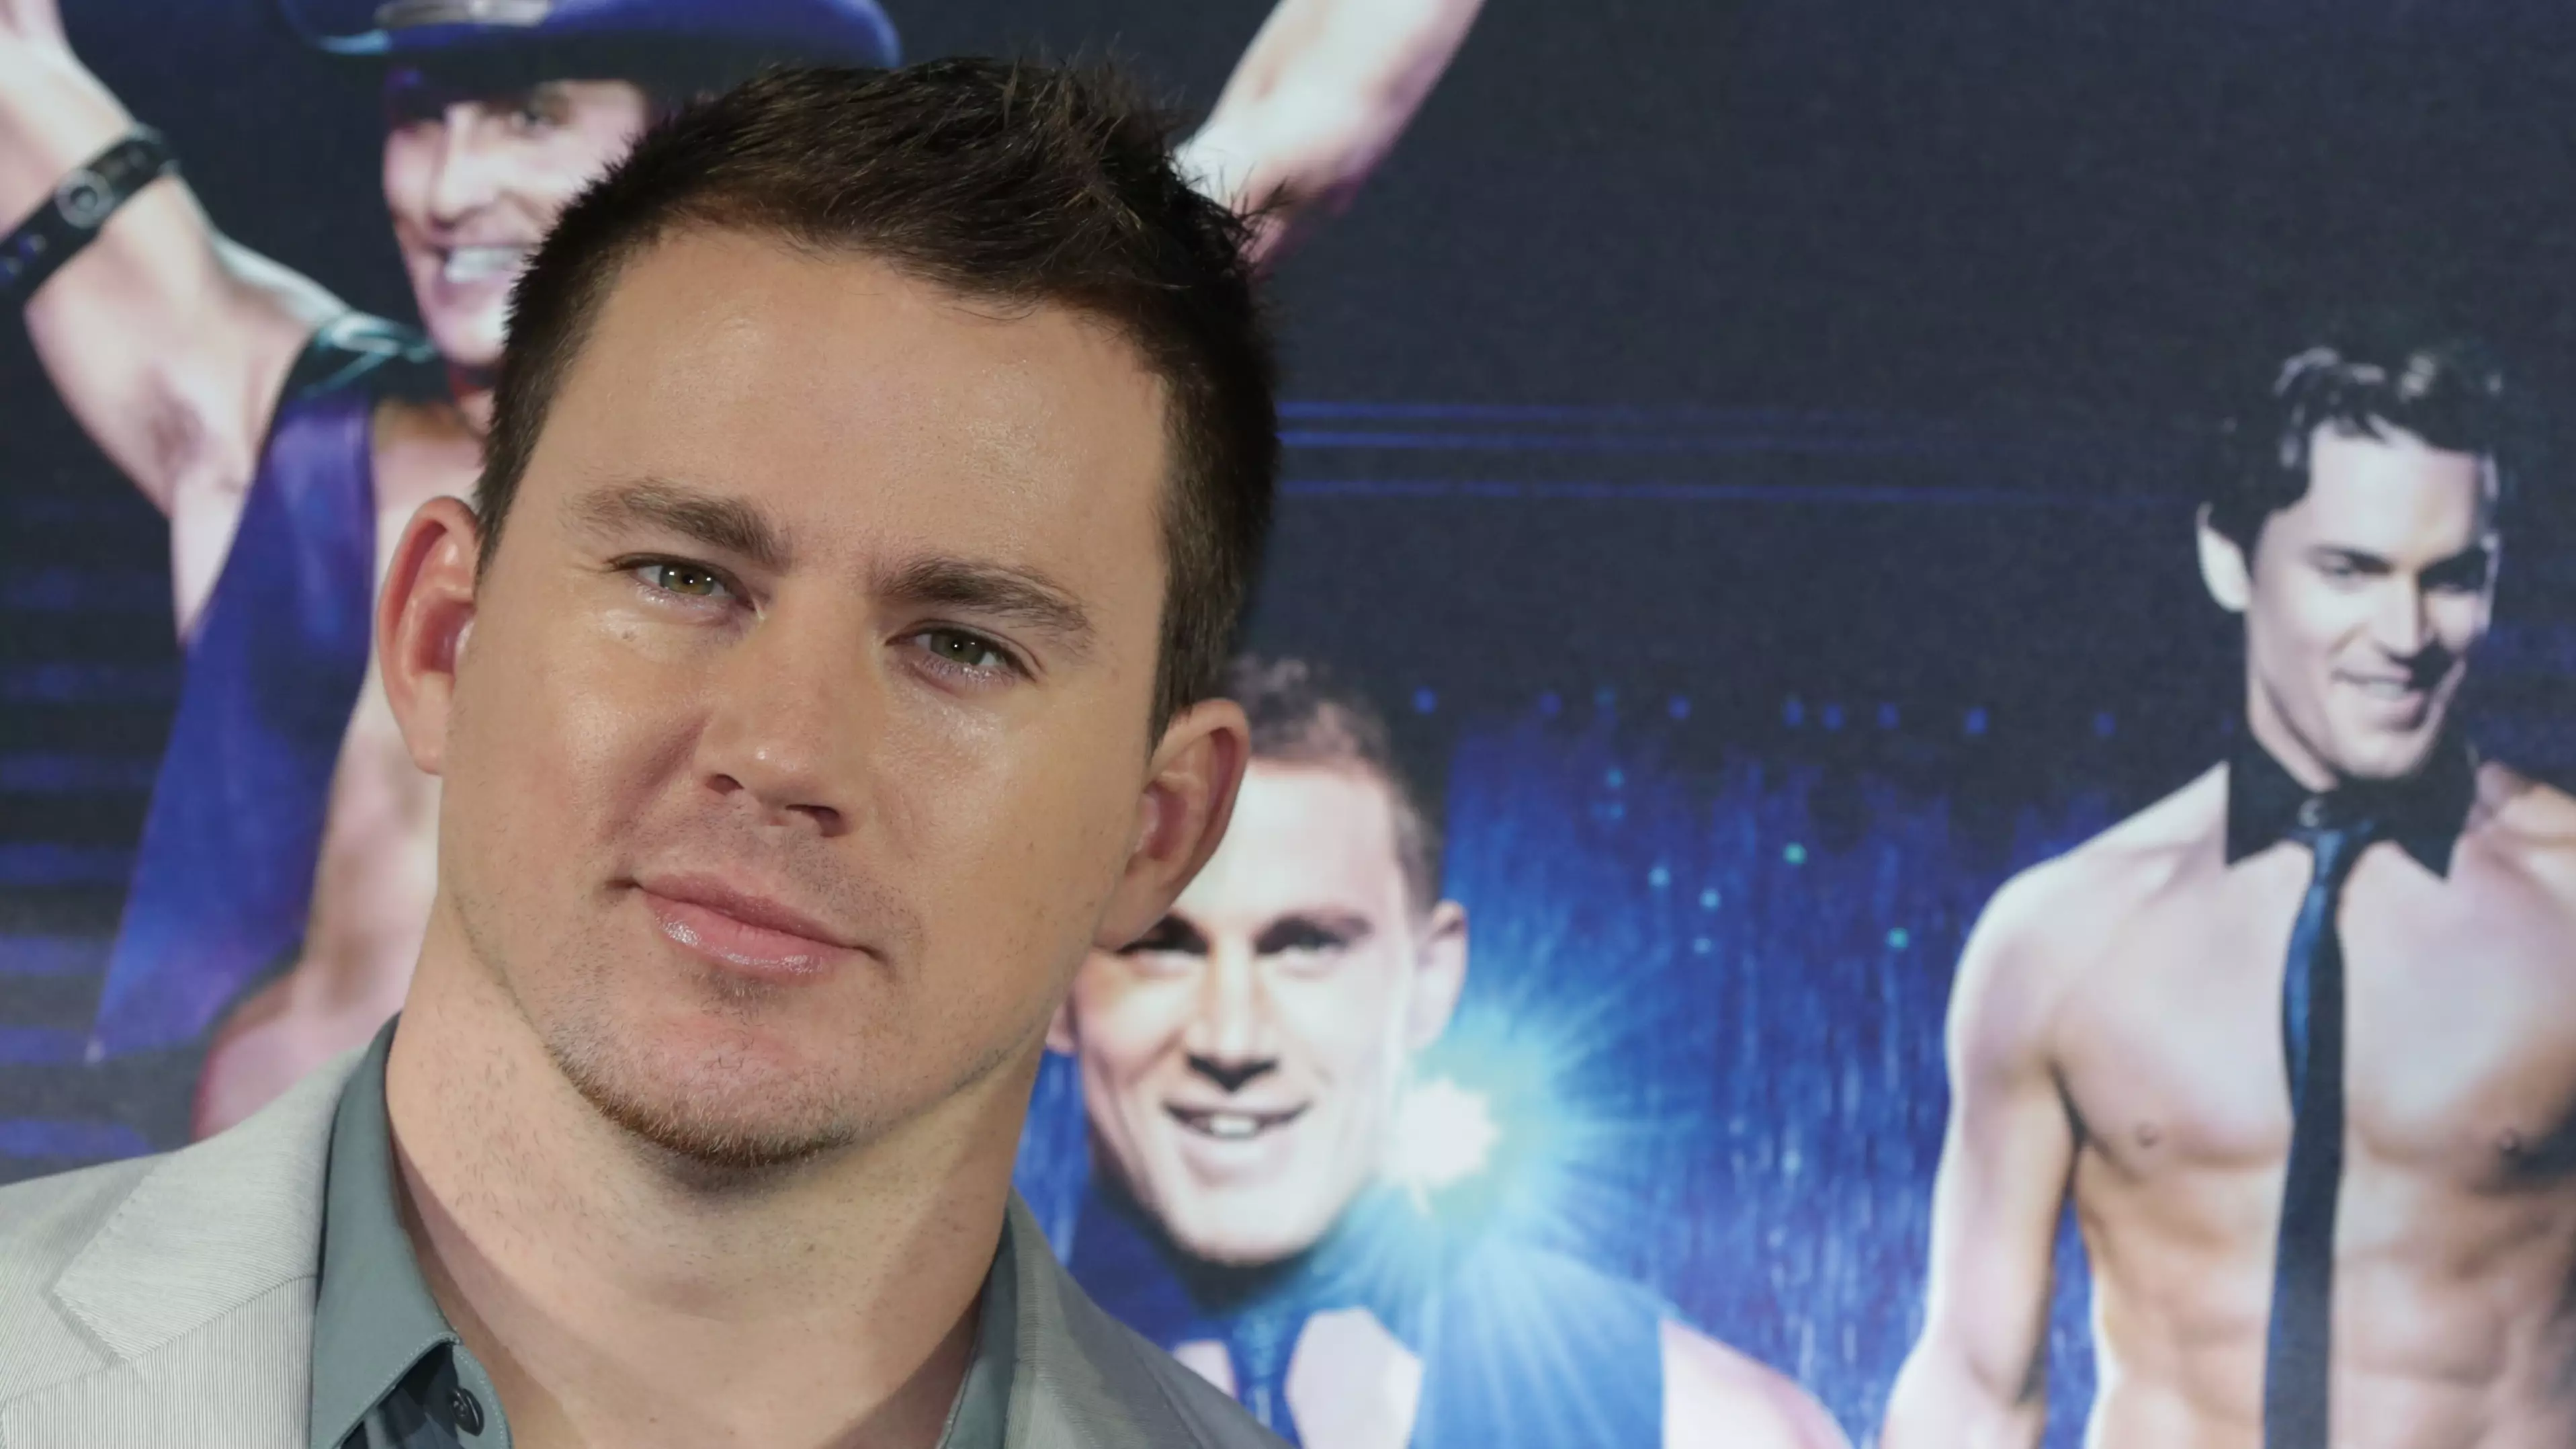 Channing Tatum Quits Instagram As 'Magic Mike' Actor Wants To 'Be In The Real World'